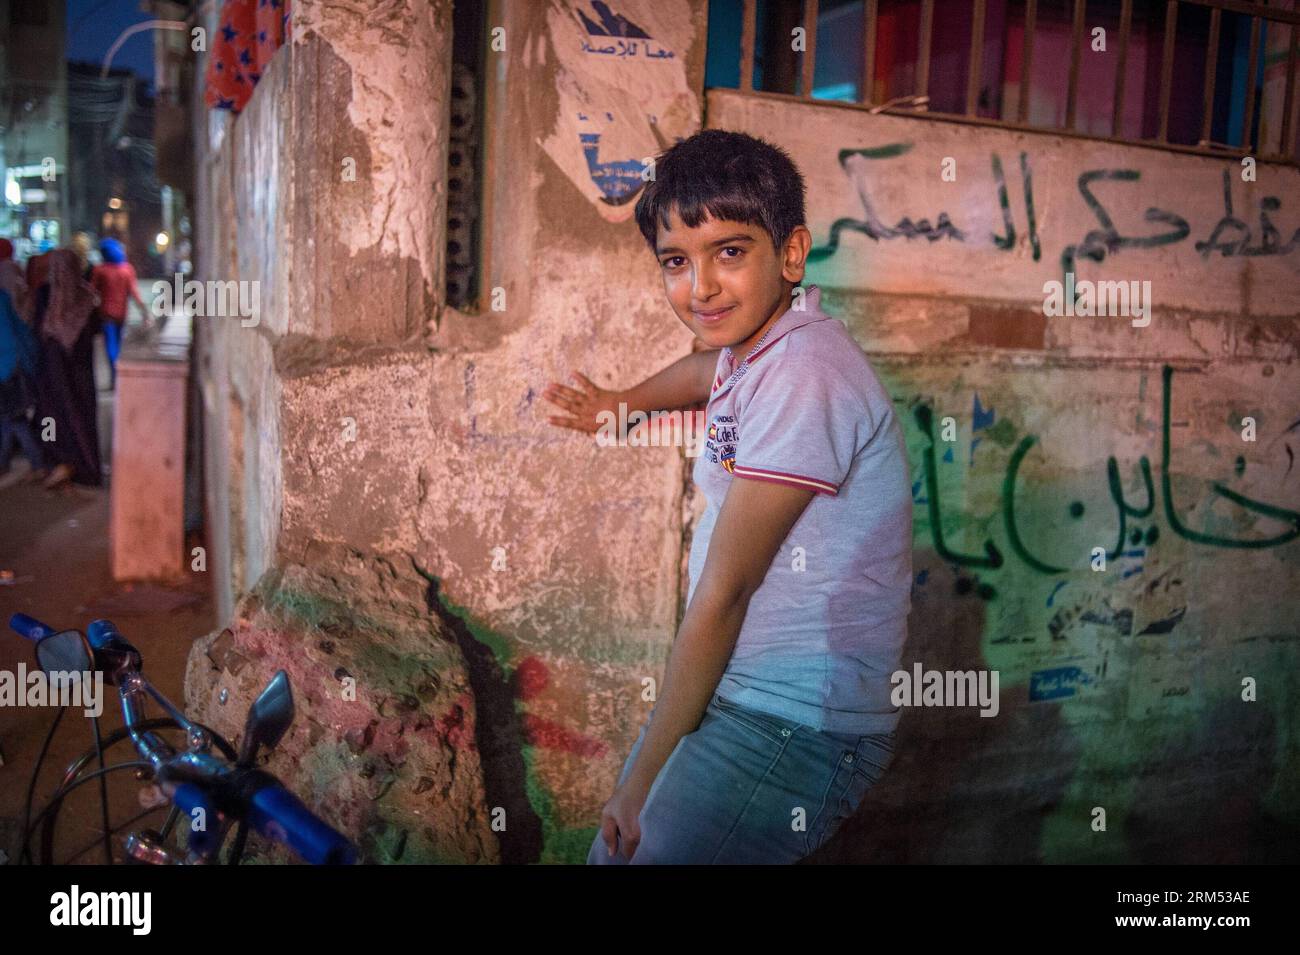 Bildnummer: 60561981  Datum: 03.10.2013  Copyright: imago/Xinhua A boy on a bike poses in Shibin Al Kawm, capital of Monufia Governorate, Egypt, on Oct. 3, 2013. Monufia is a mainly agricultural governorate in Egypt, located to the north of Cairo. It is known particularly as the birthplace of two Egyptian presidents, Anwar Sadat and Hosni Mubarak. (Xinhua/Pan Chaoyue) EGYPT-MONUFIA-DAILY LIFE PUBLICATIONxNOTxINxCHN xas x0x 2013 quer     60561981 Date 03 10 2013 Copyright Imago XINHUA a Boy ON a Bike Poses in  Al  Capital of  Governorate Egypt ON OCT 3 2013  IS a mainly Agricultural Governorate Stock Photo